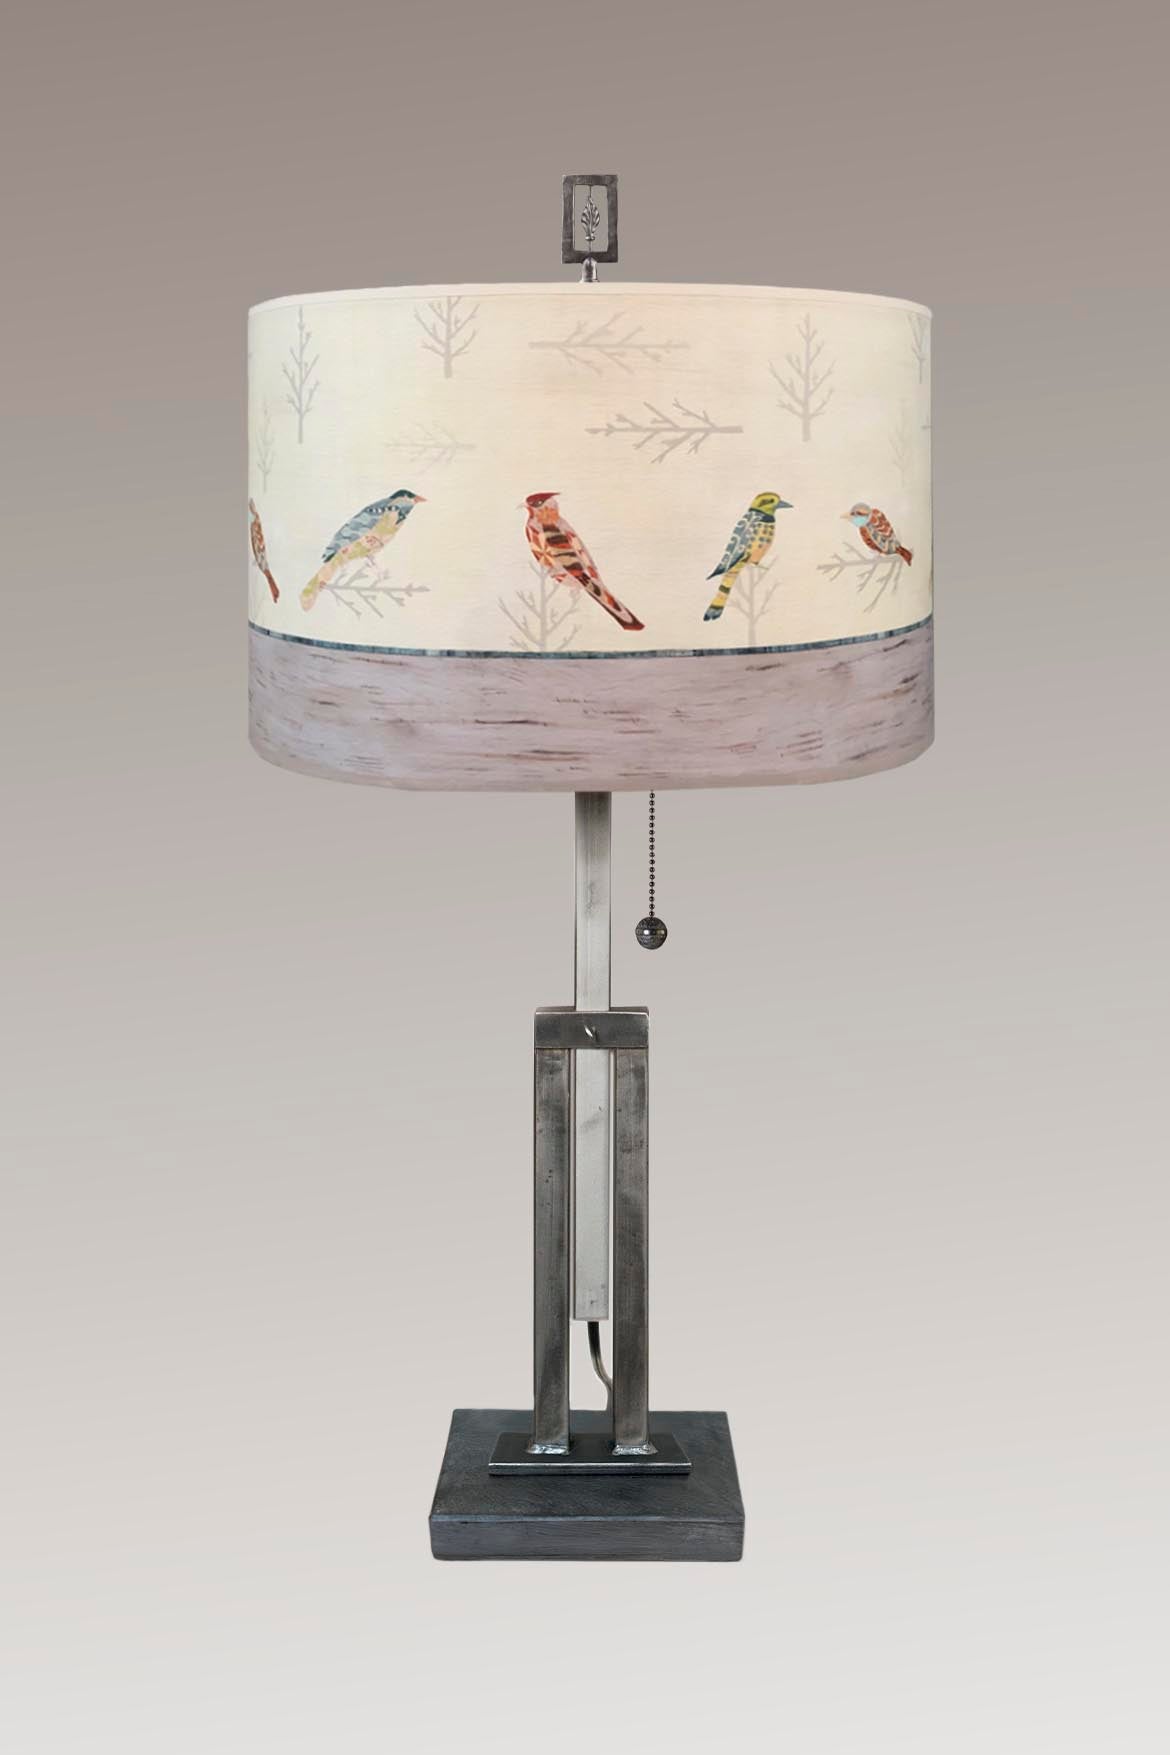 Janna Ugone &amp; Co Table Lamps Adjustable-Height Steel Table Lamp with Large Drum Shade in Bird Friends